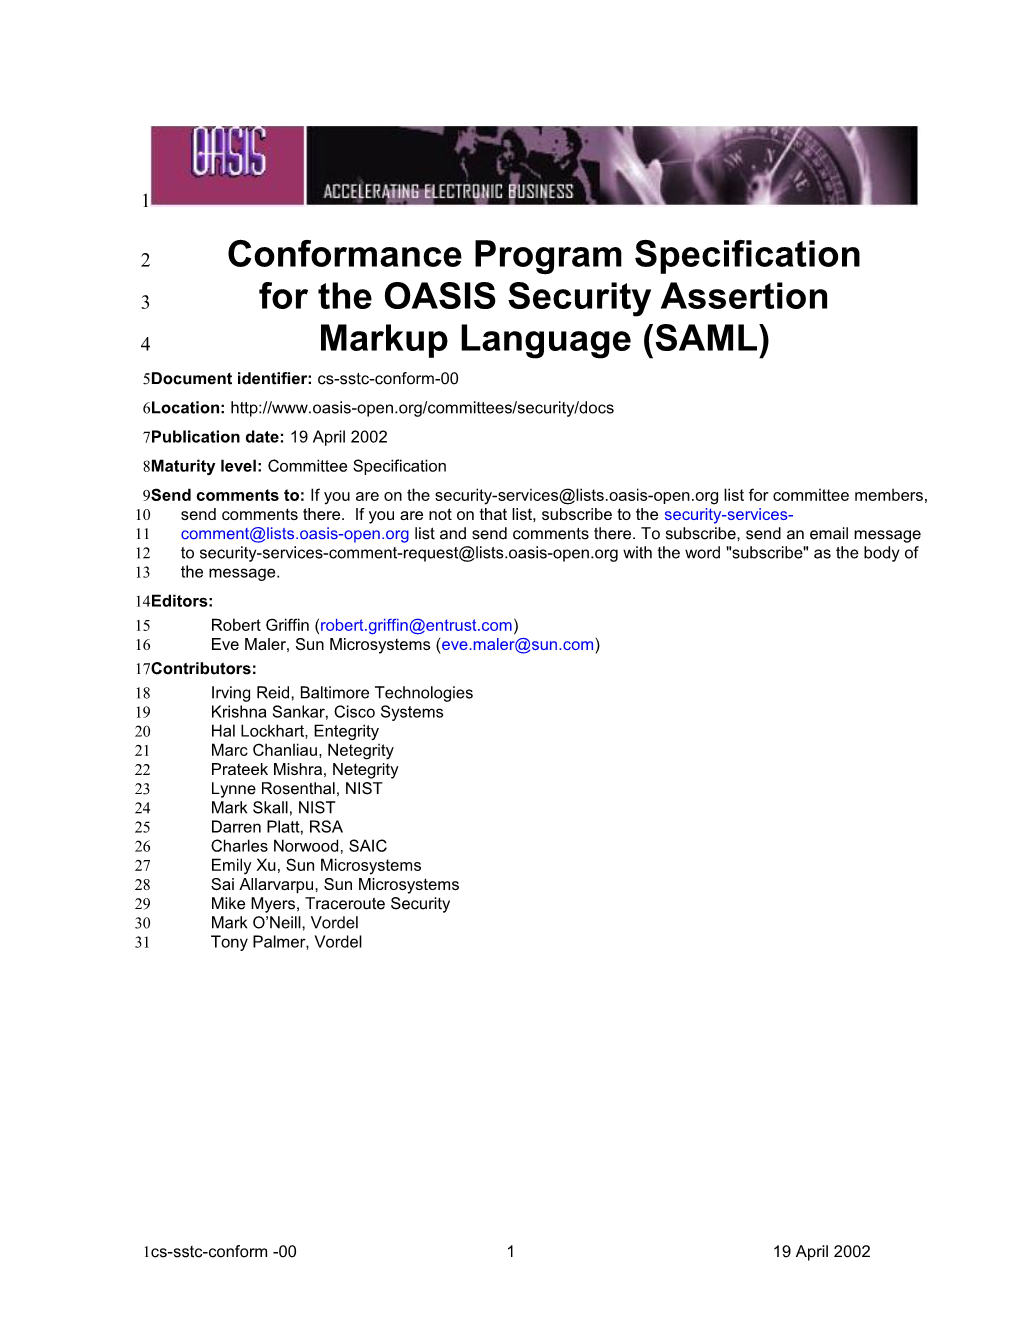 Conformance Program Specification for the OASIS Security Assertion Markup Language (SAML)